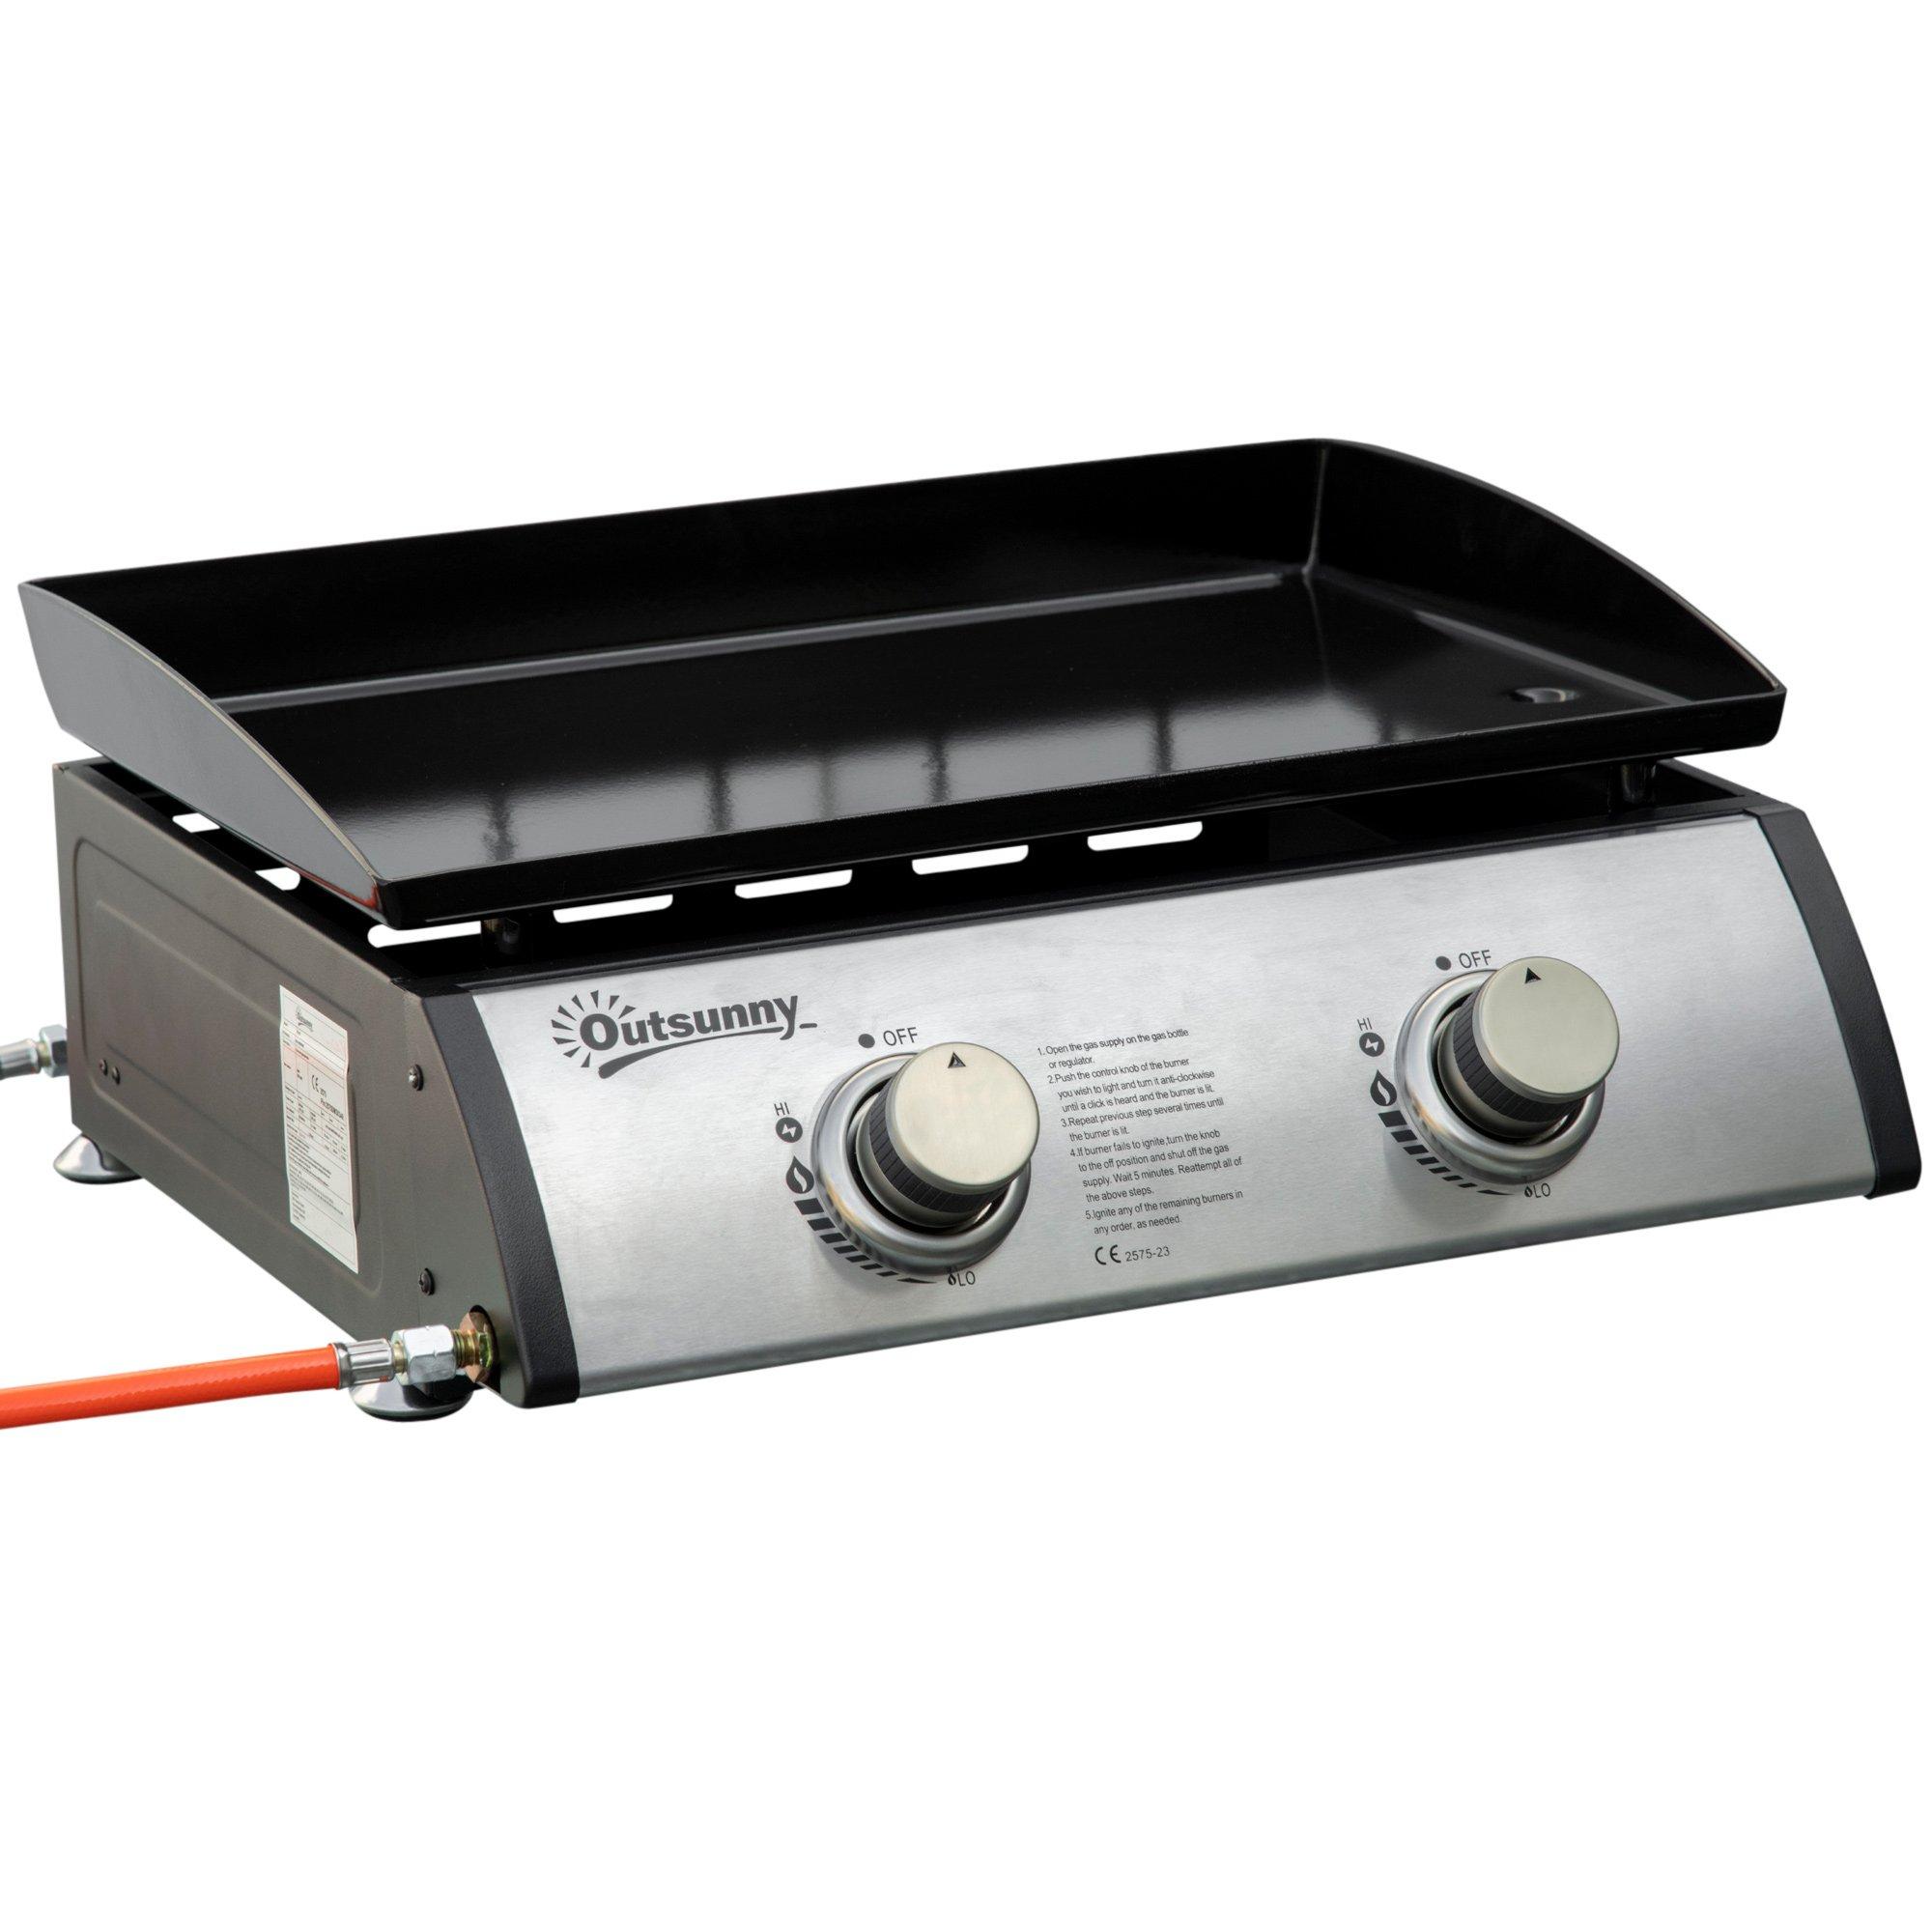 Portable Gas Plancha BBQ Grill with 2 Stainless Steel Burner, 6kW